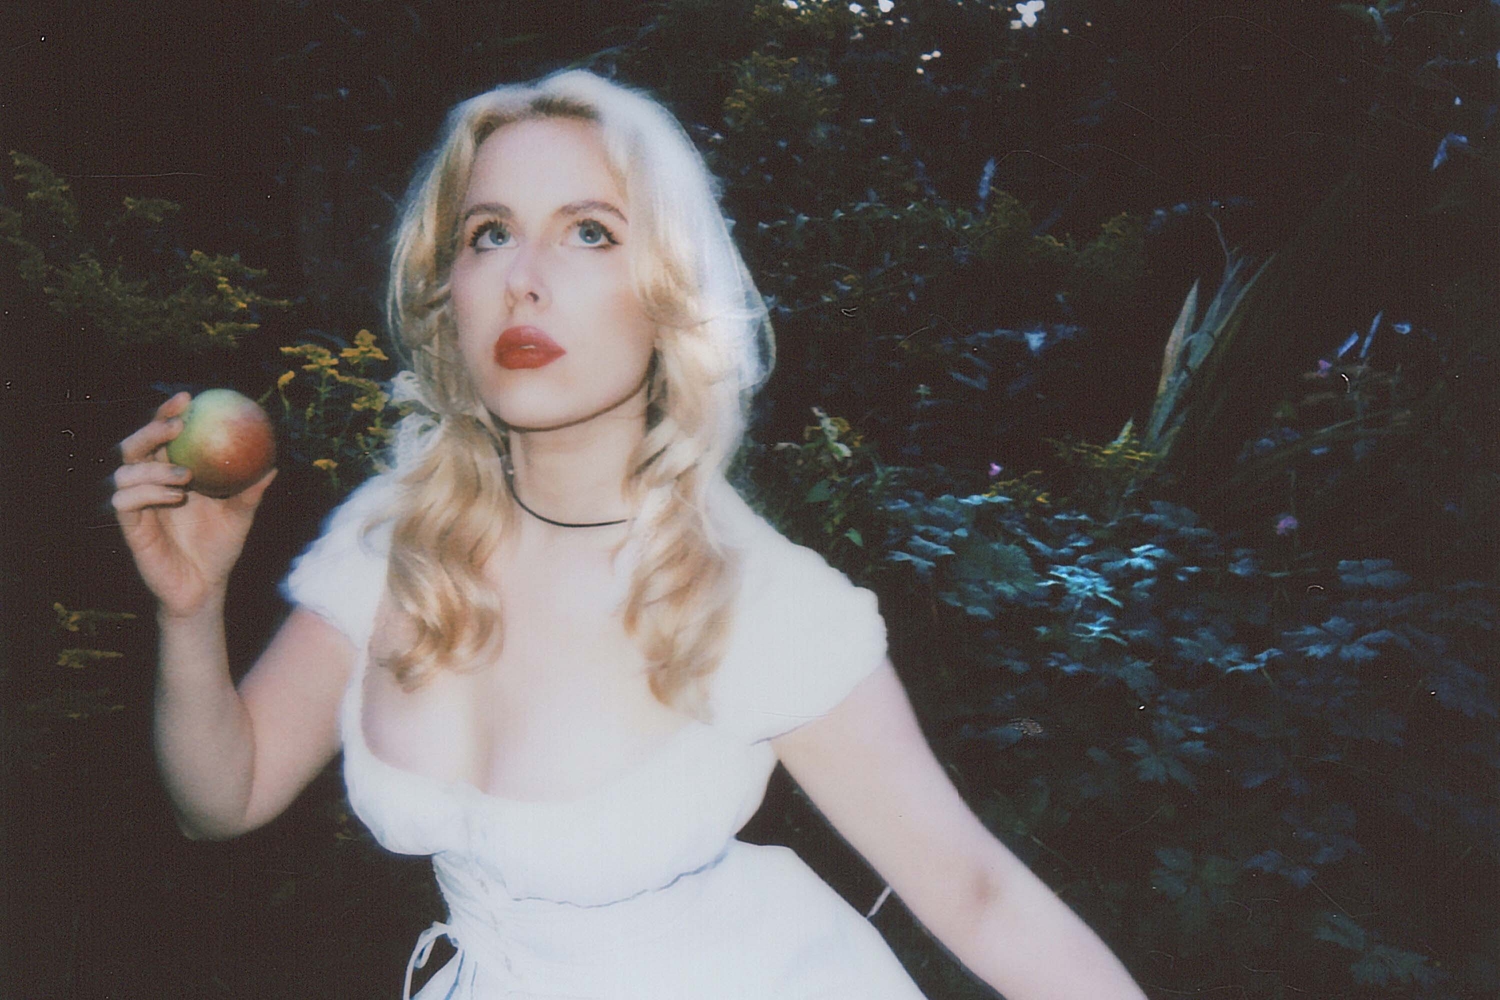 Holly Macve on working with Lana Del Rey and her new EP ‘Time Is Forever’